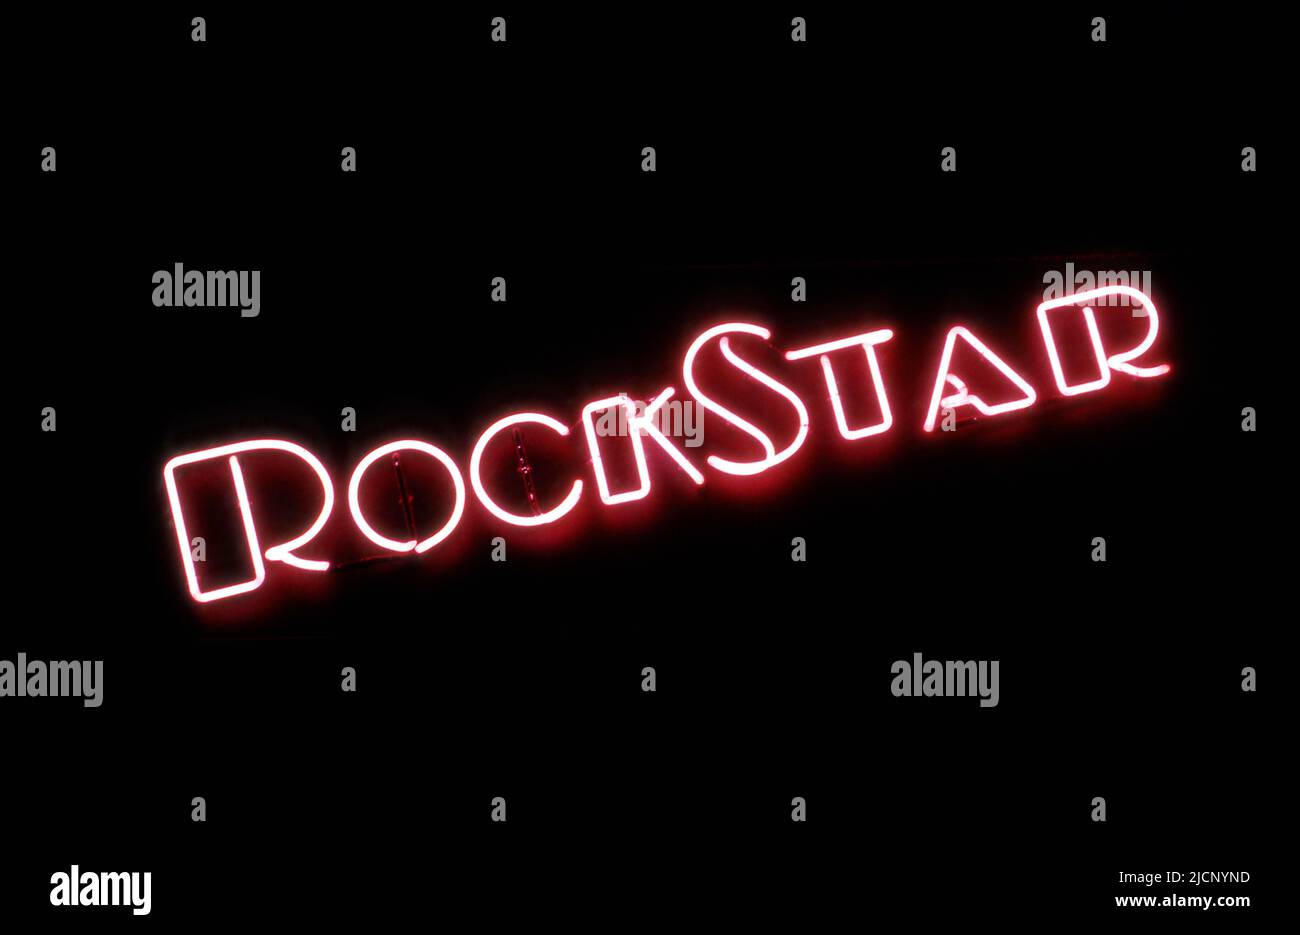 Rock Star, Neon sign, Melrose Ave., Los Angeles, CA Stock Photo